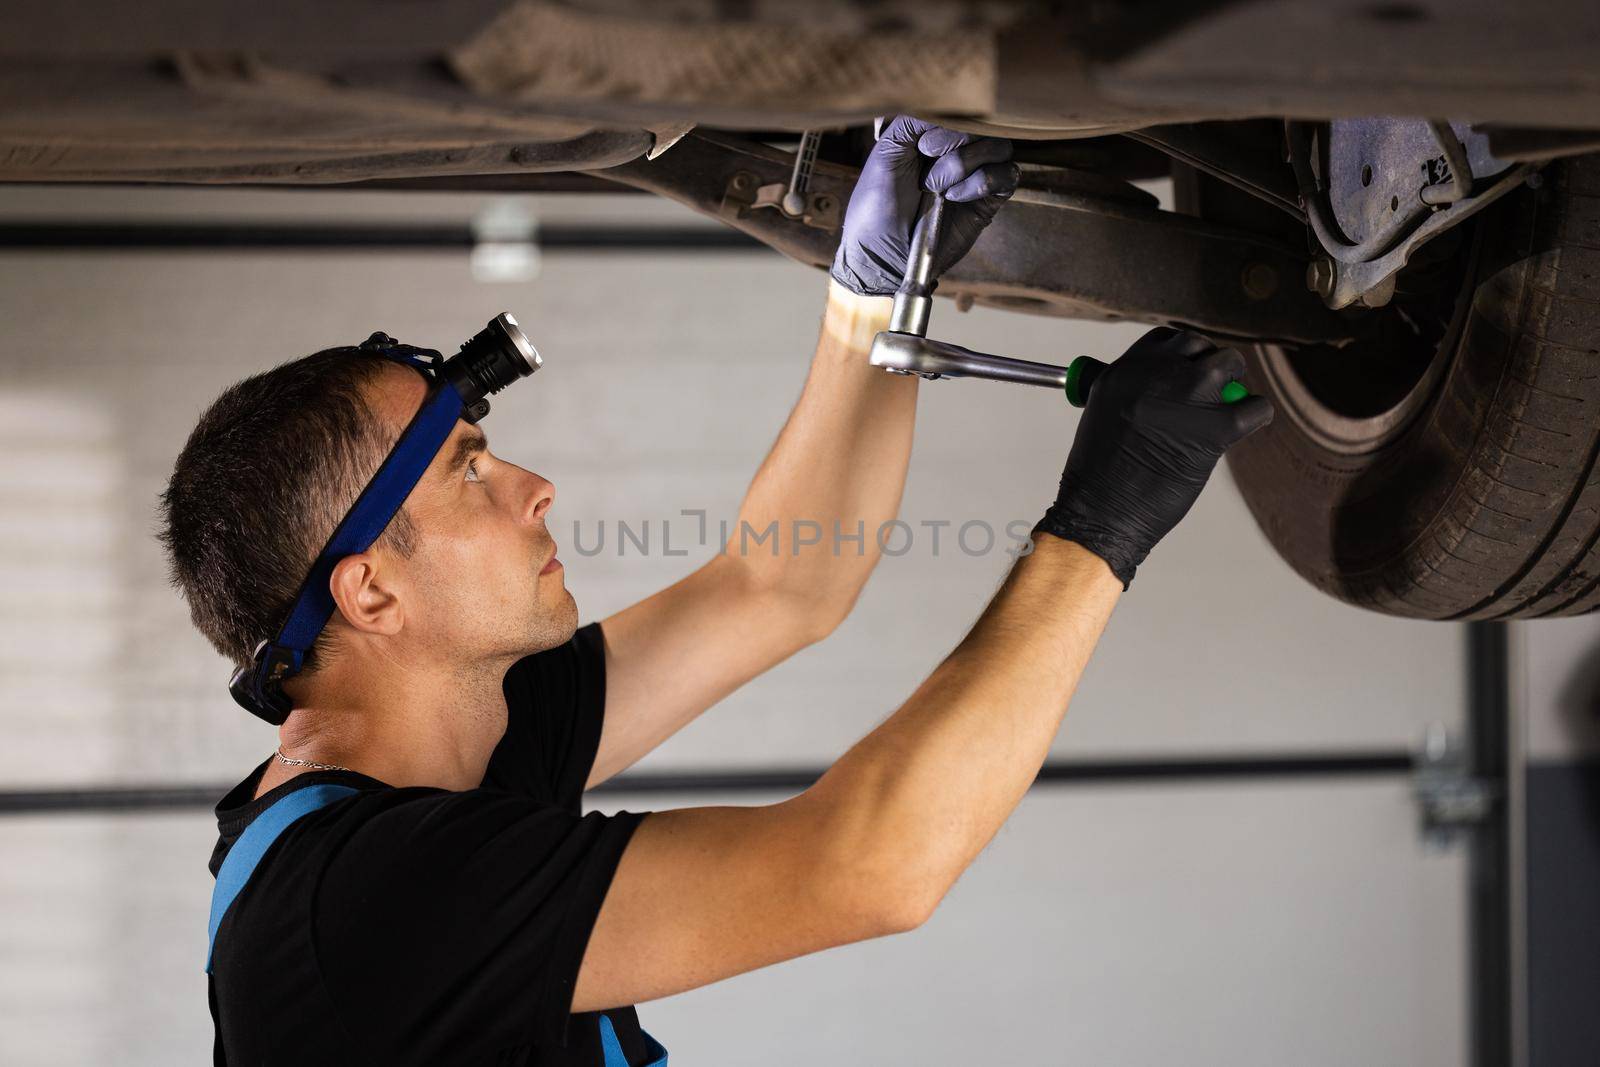 Professional car mechanic screwing details of car with special tool on lifted automobile at repair service station. Skillful man in uniform fixing car. Car service, repair maintenance by uflypro